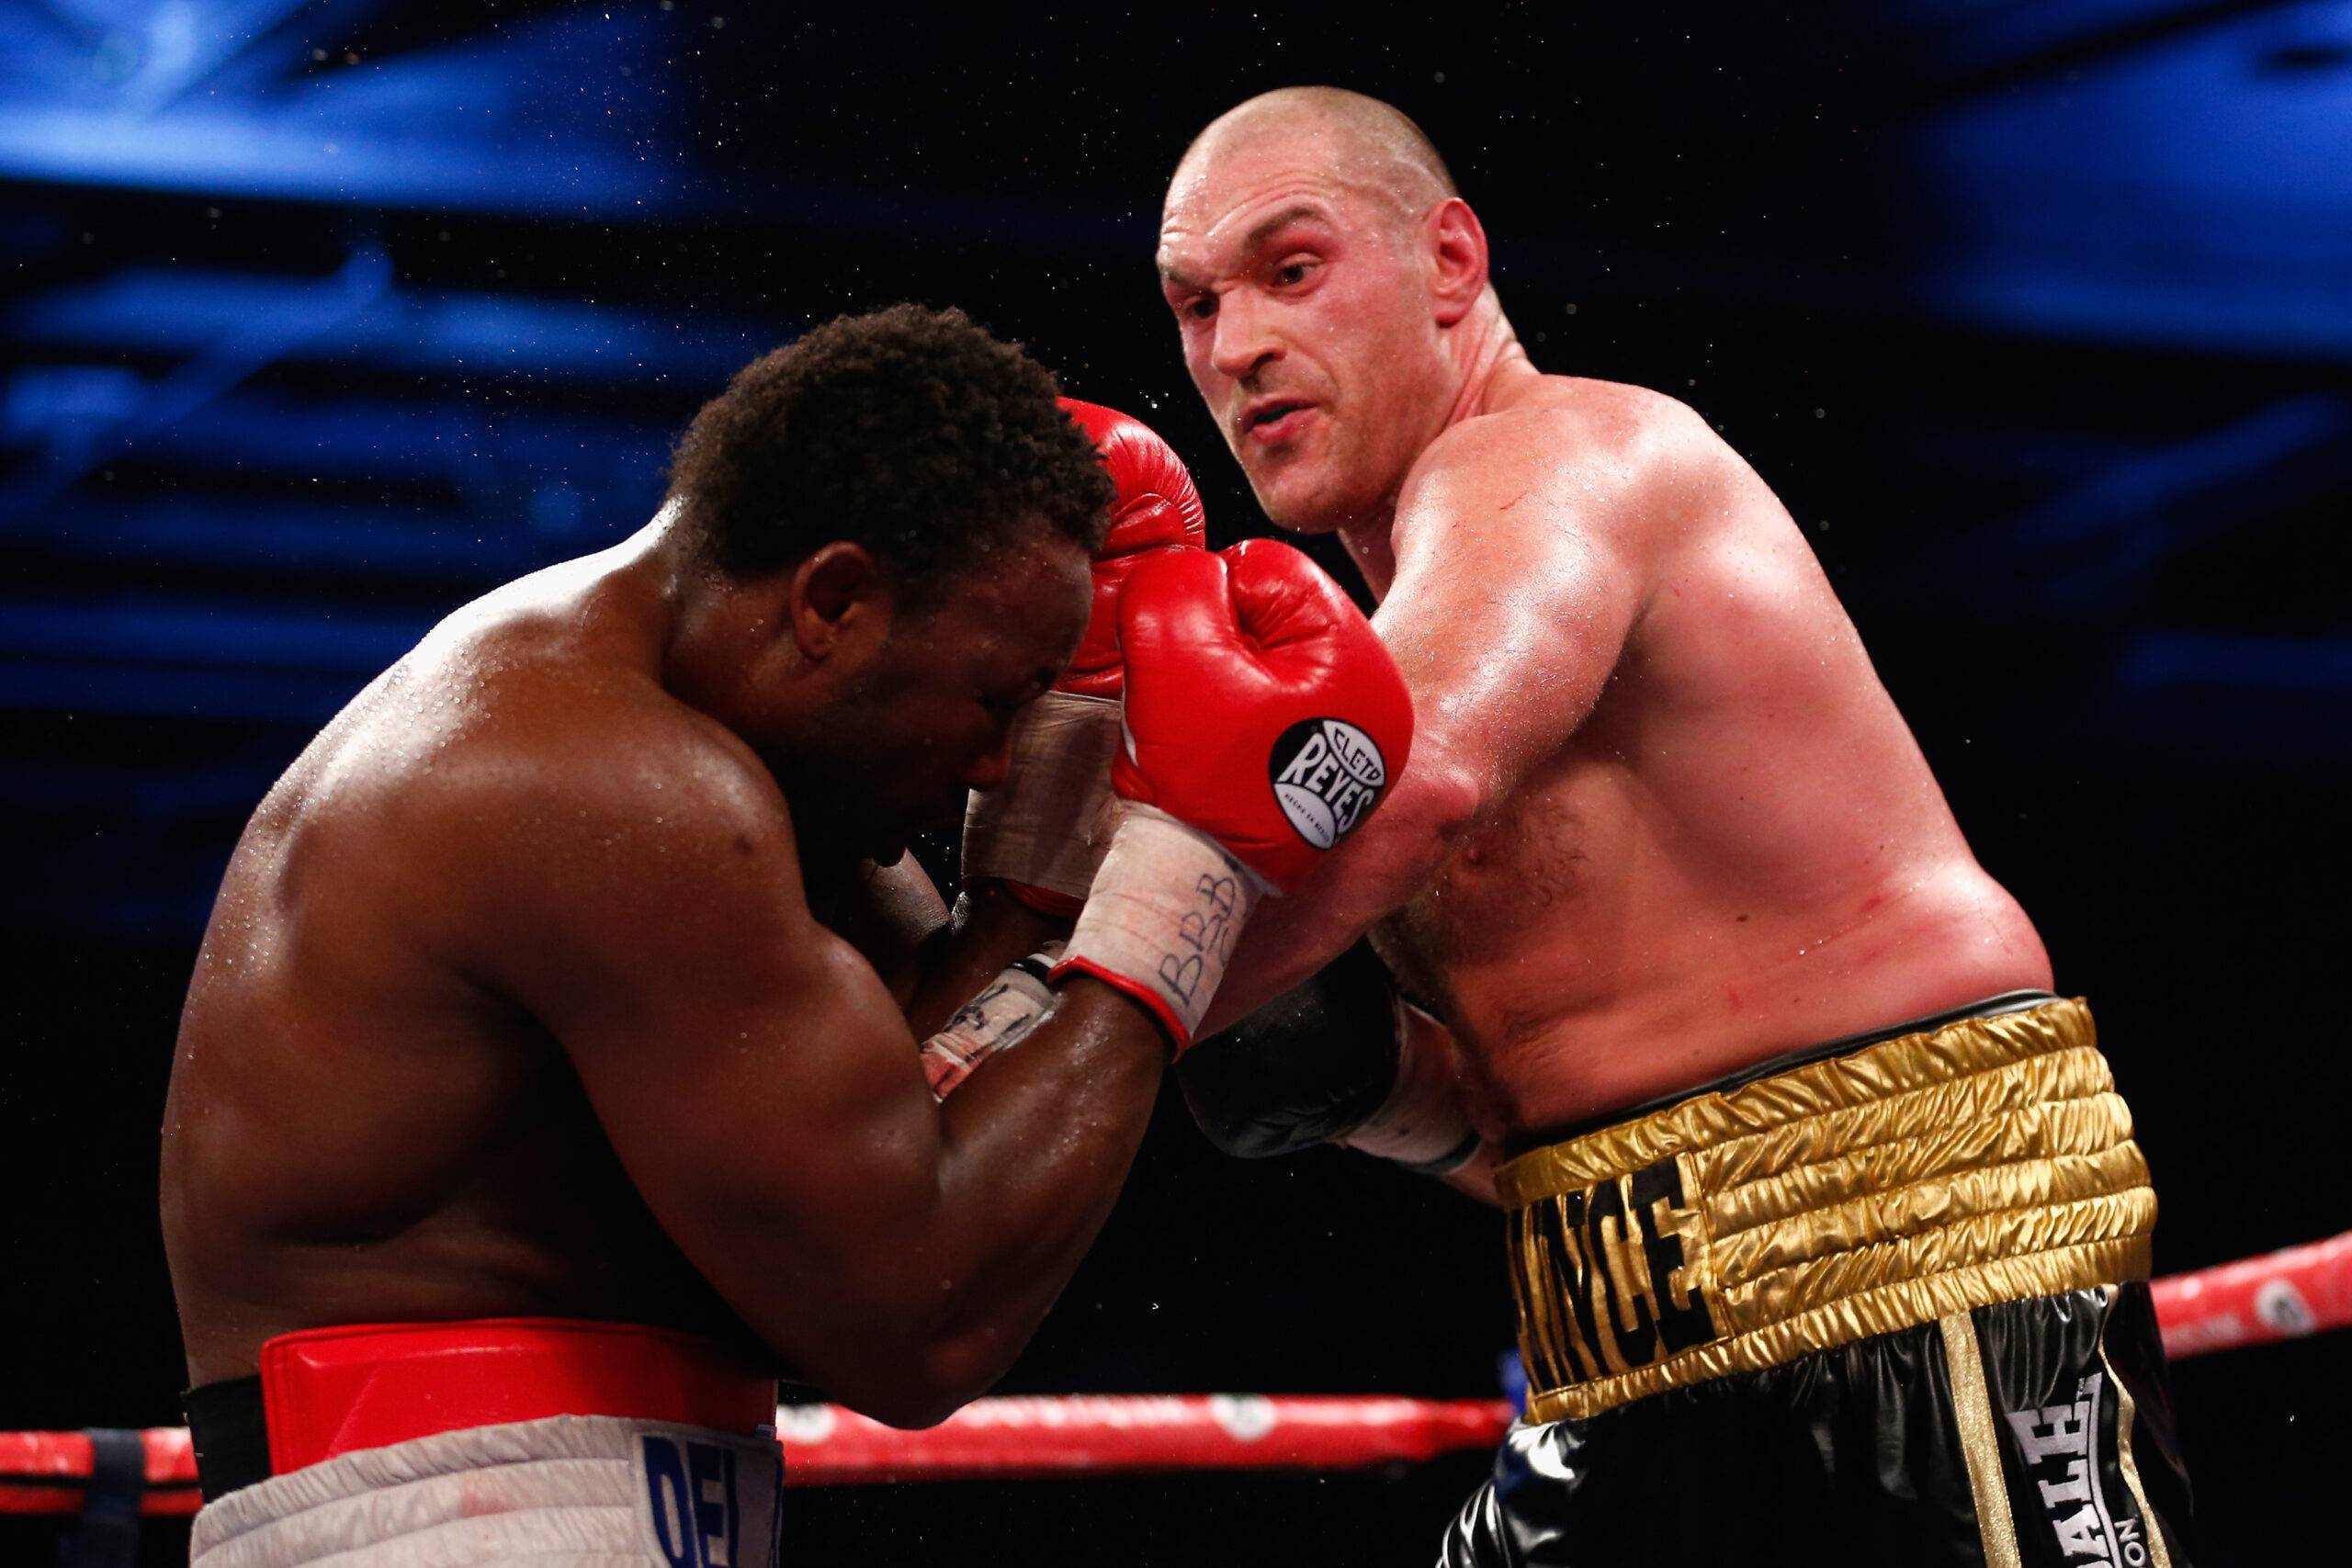 Tyson Fury has made an offer to Derek Chisora for a trilogy fight, according to Eddie Hearn